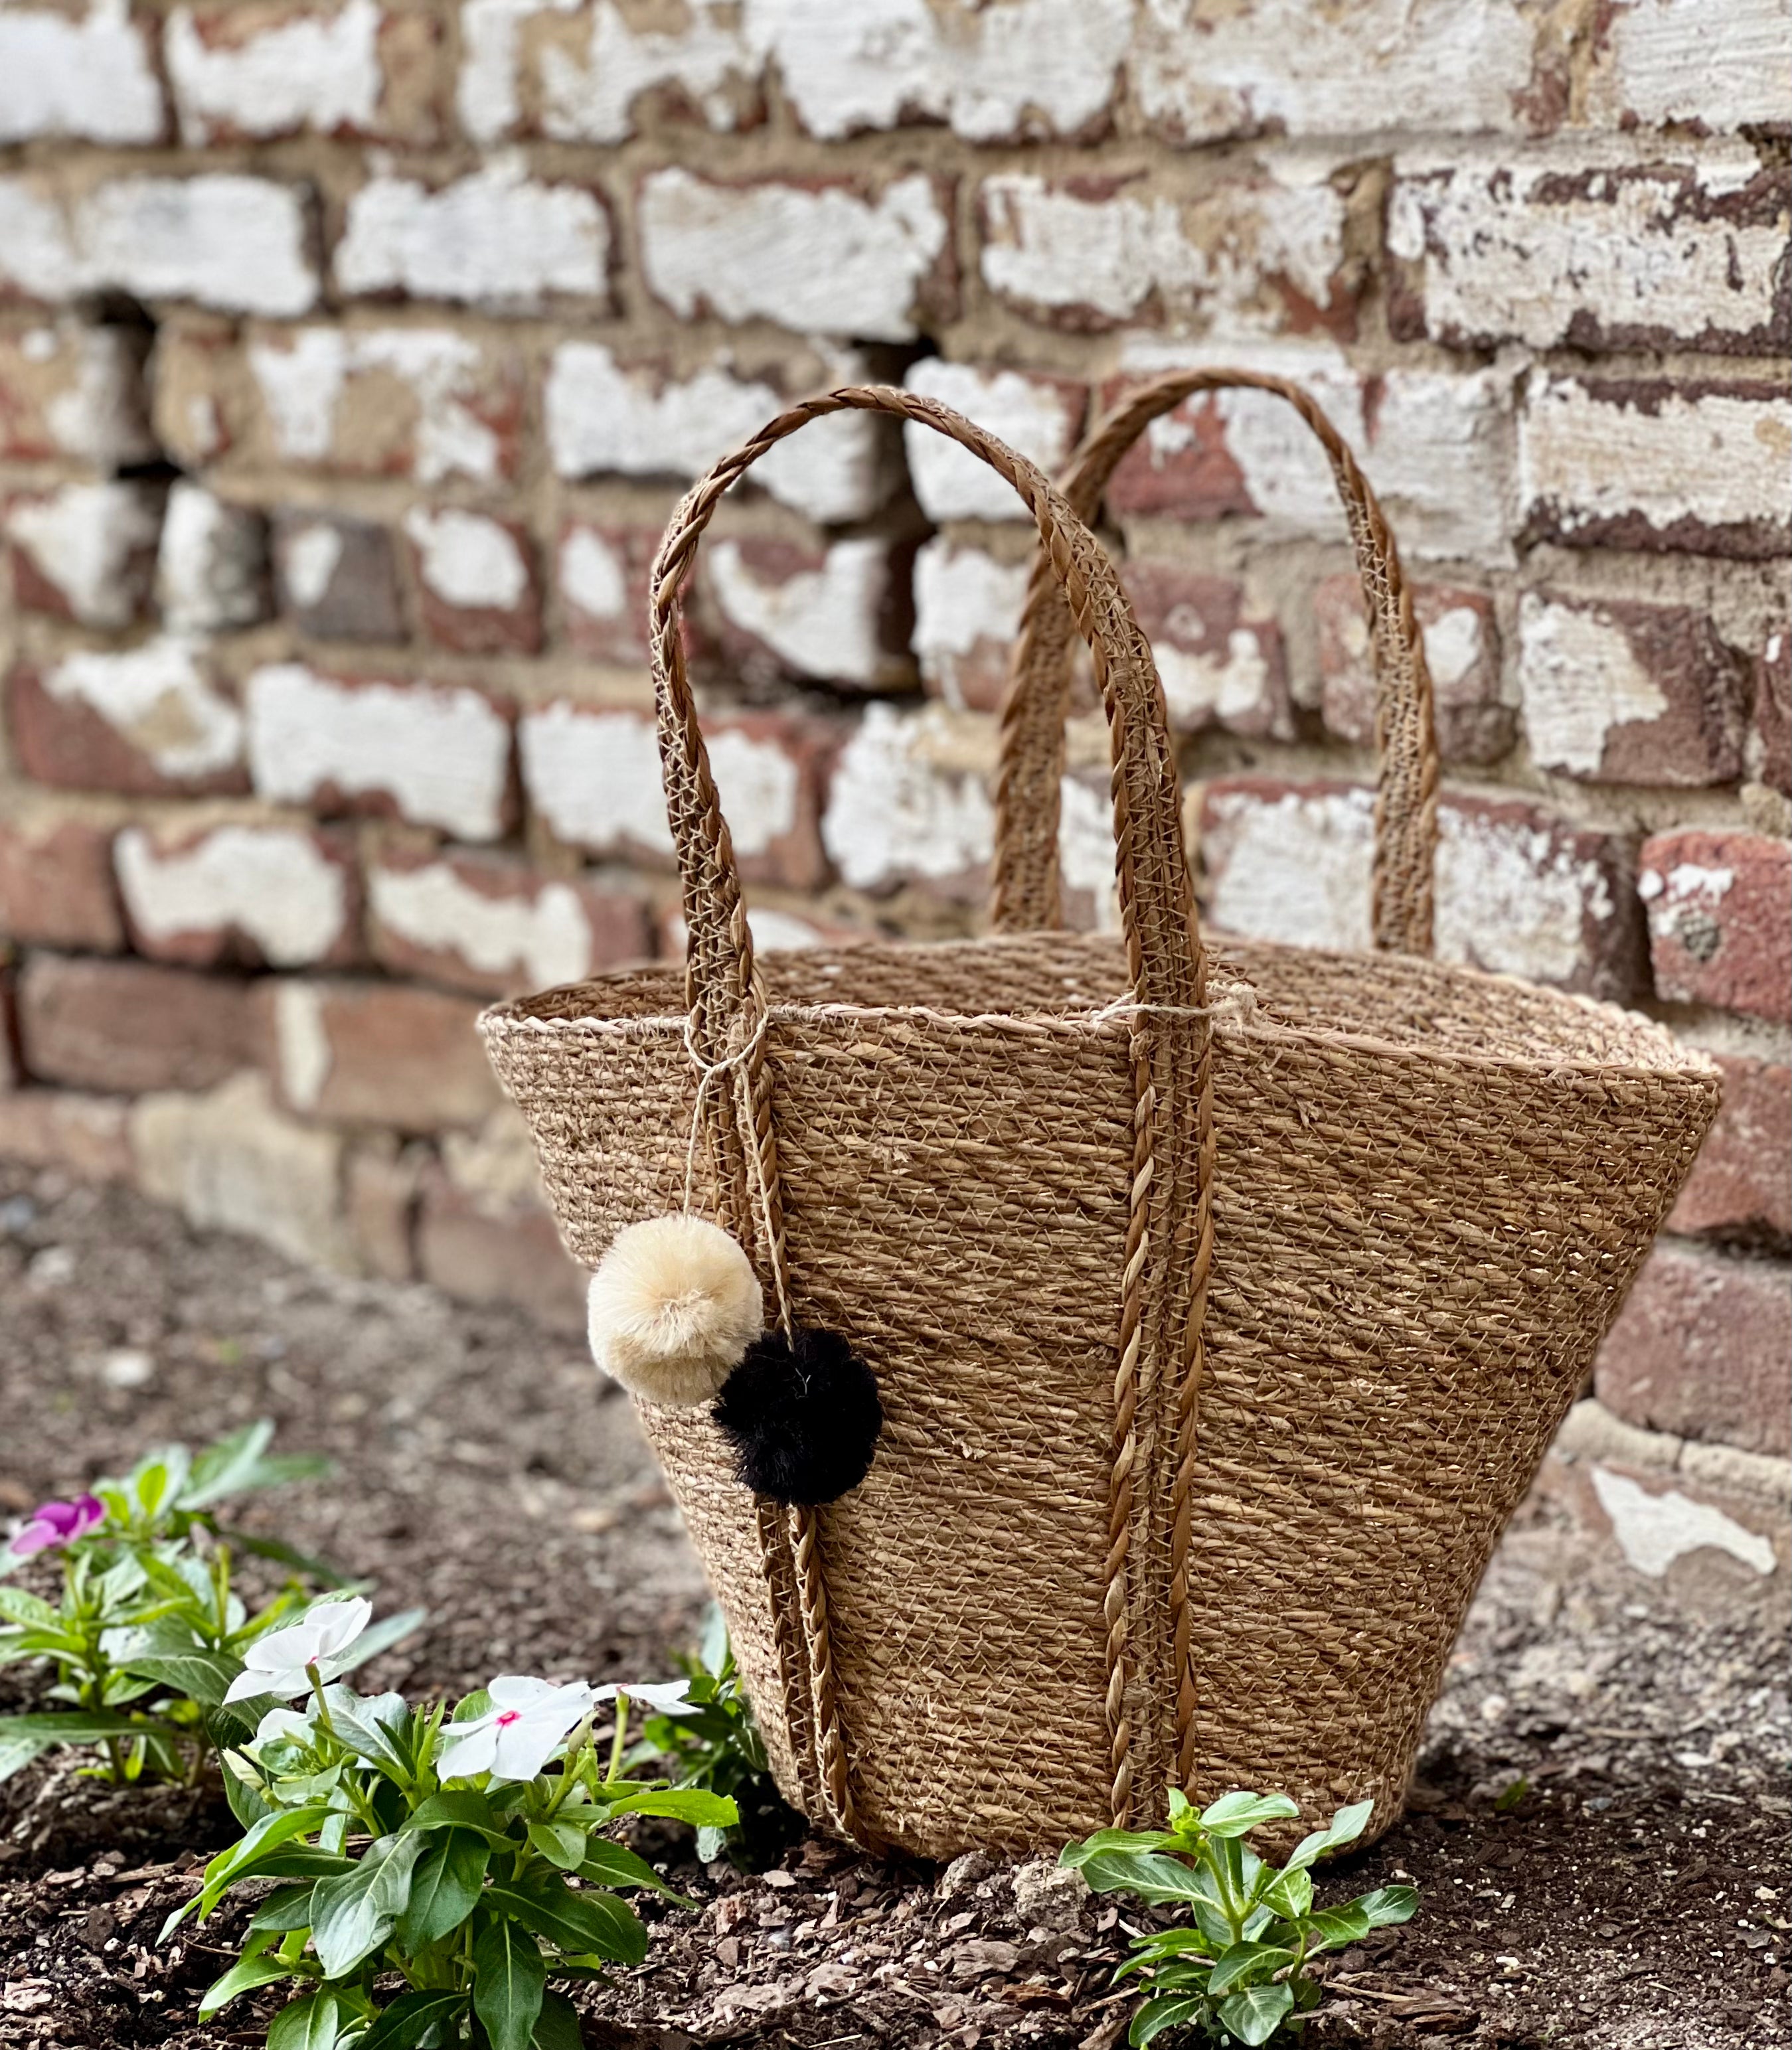 Handmade Seagrass Tote with Jute Tassels